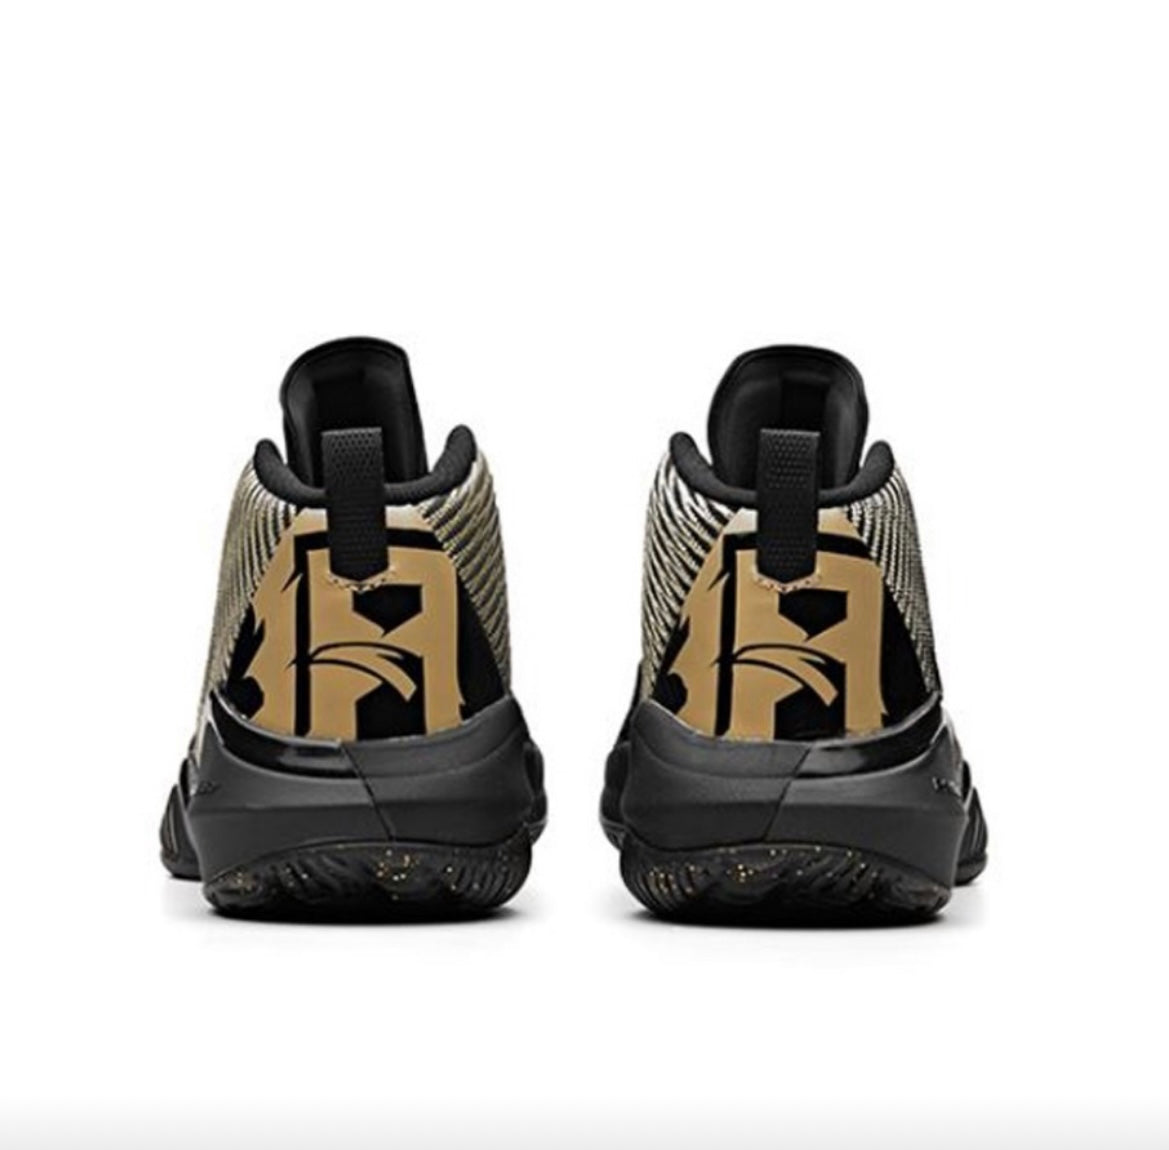 Klay Thompson x Anta Shock The Game 2.0 Basketball Shoes - Black/Gold